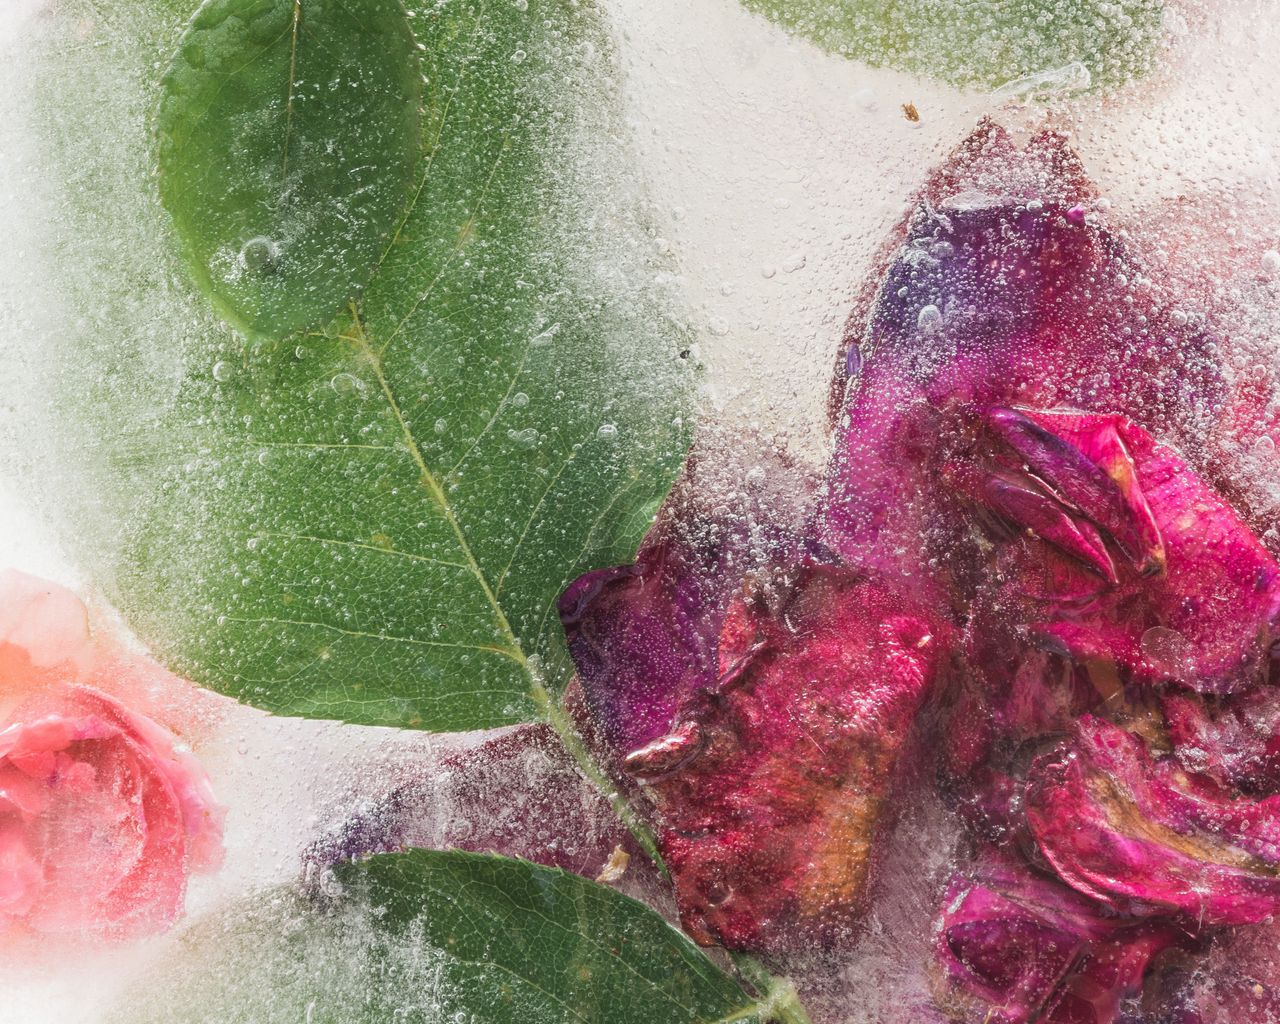 Download wallpaper 1280x1024 roses, flowers, ice, leaves, frozen standard 5:4 HD background